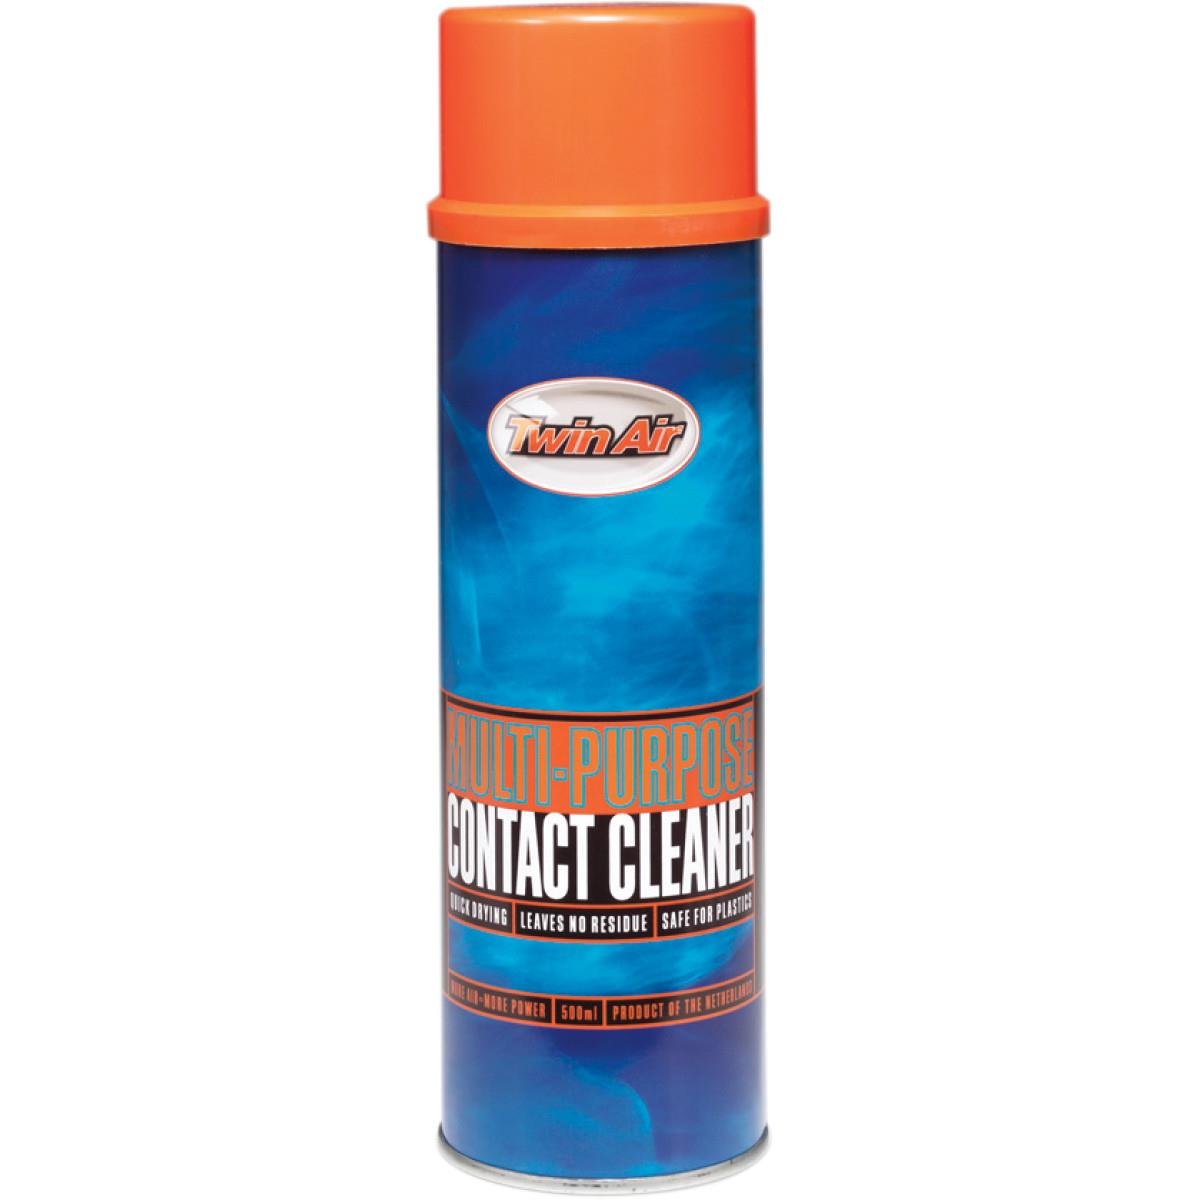 Twin Air Nettoyant Contact  500 ml